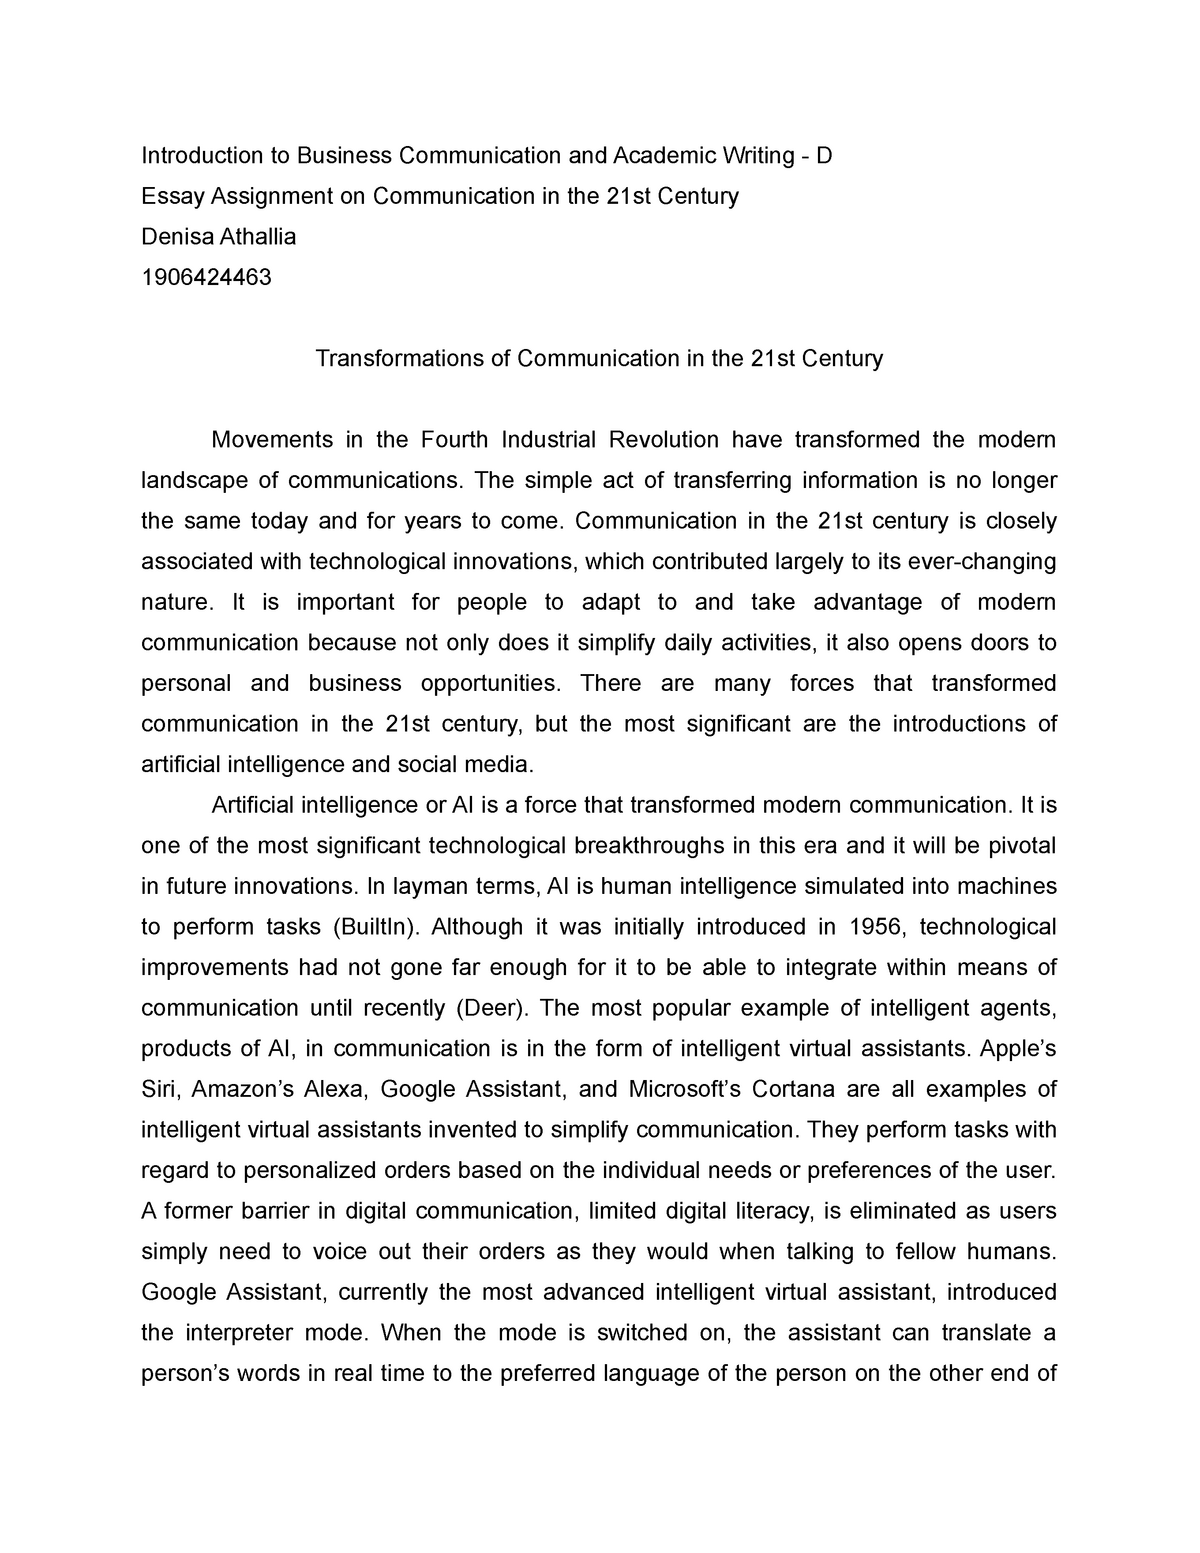 essay on communication in business world